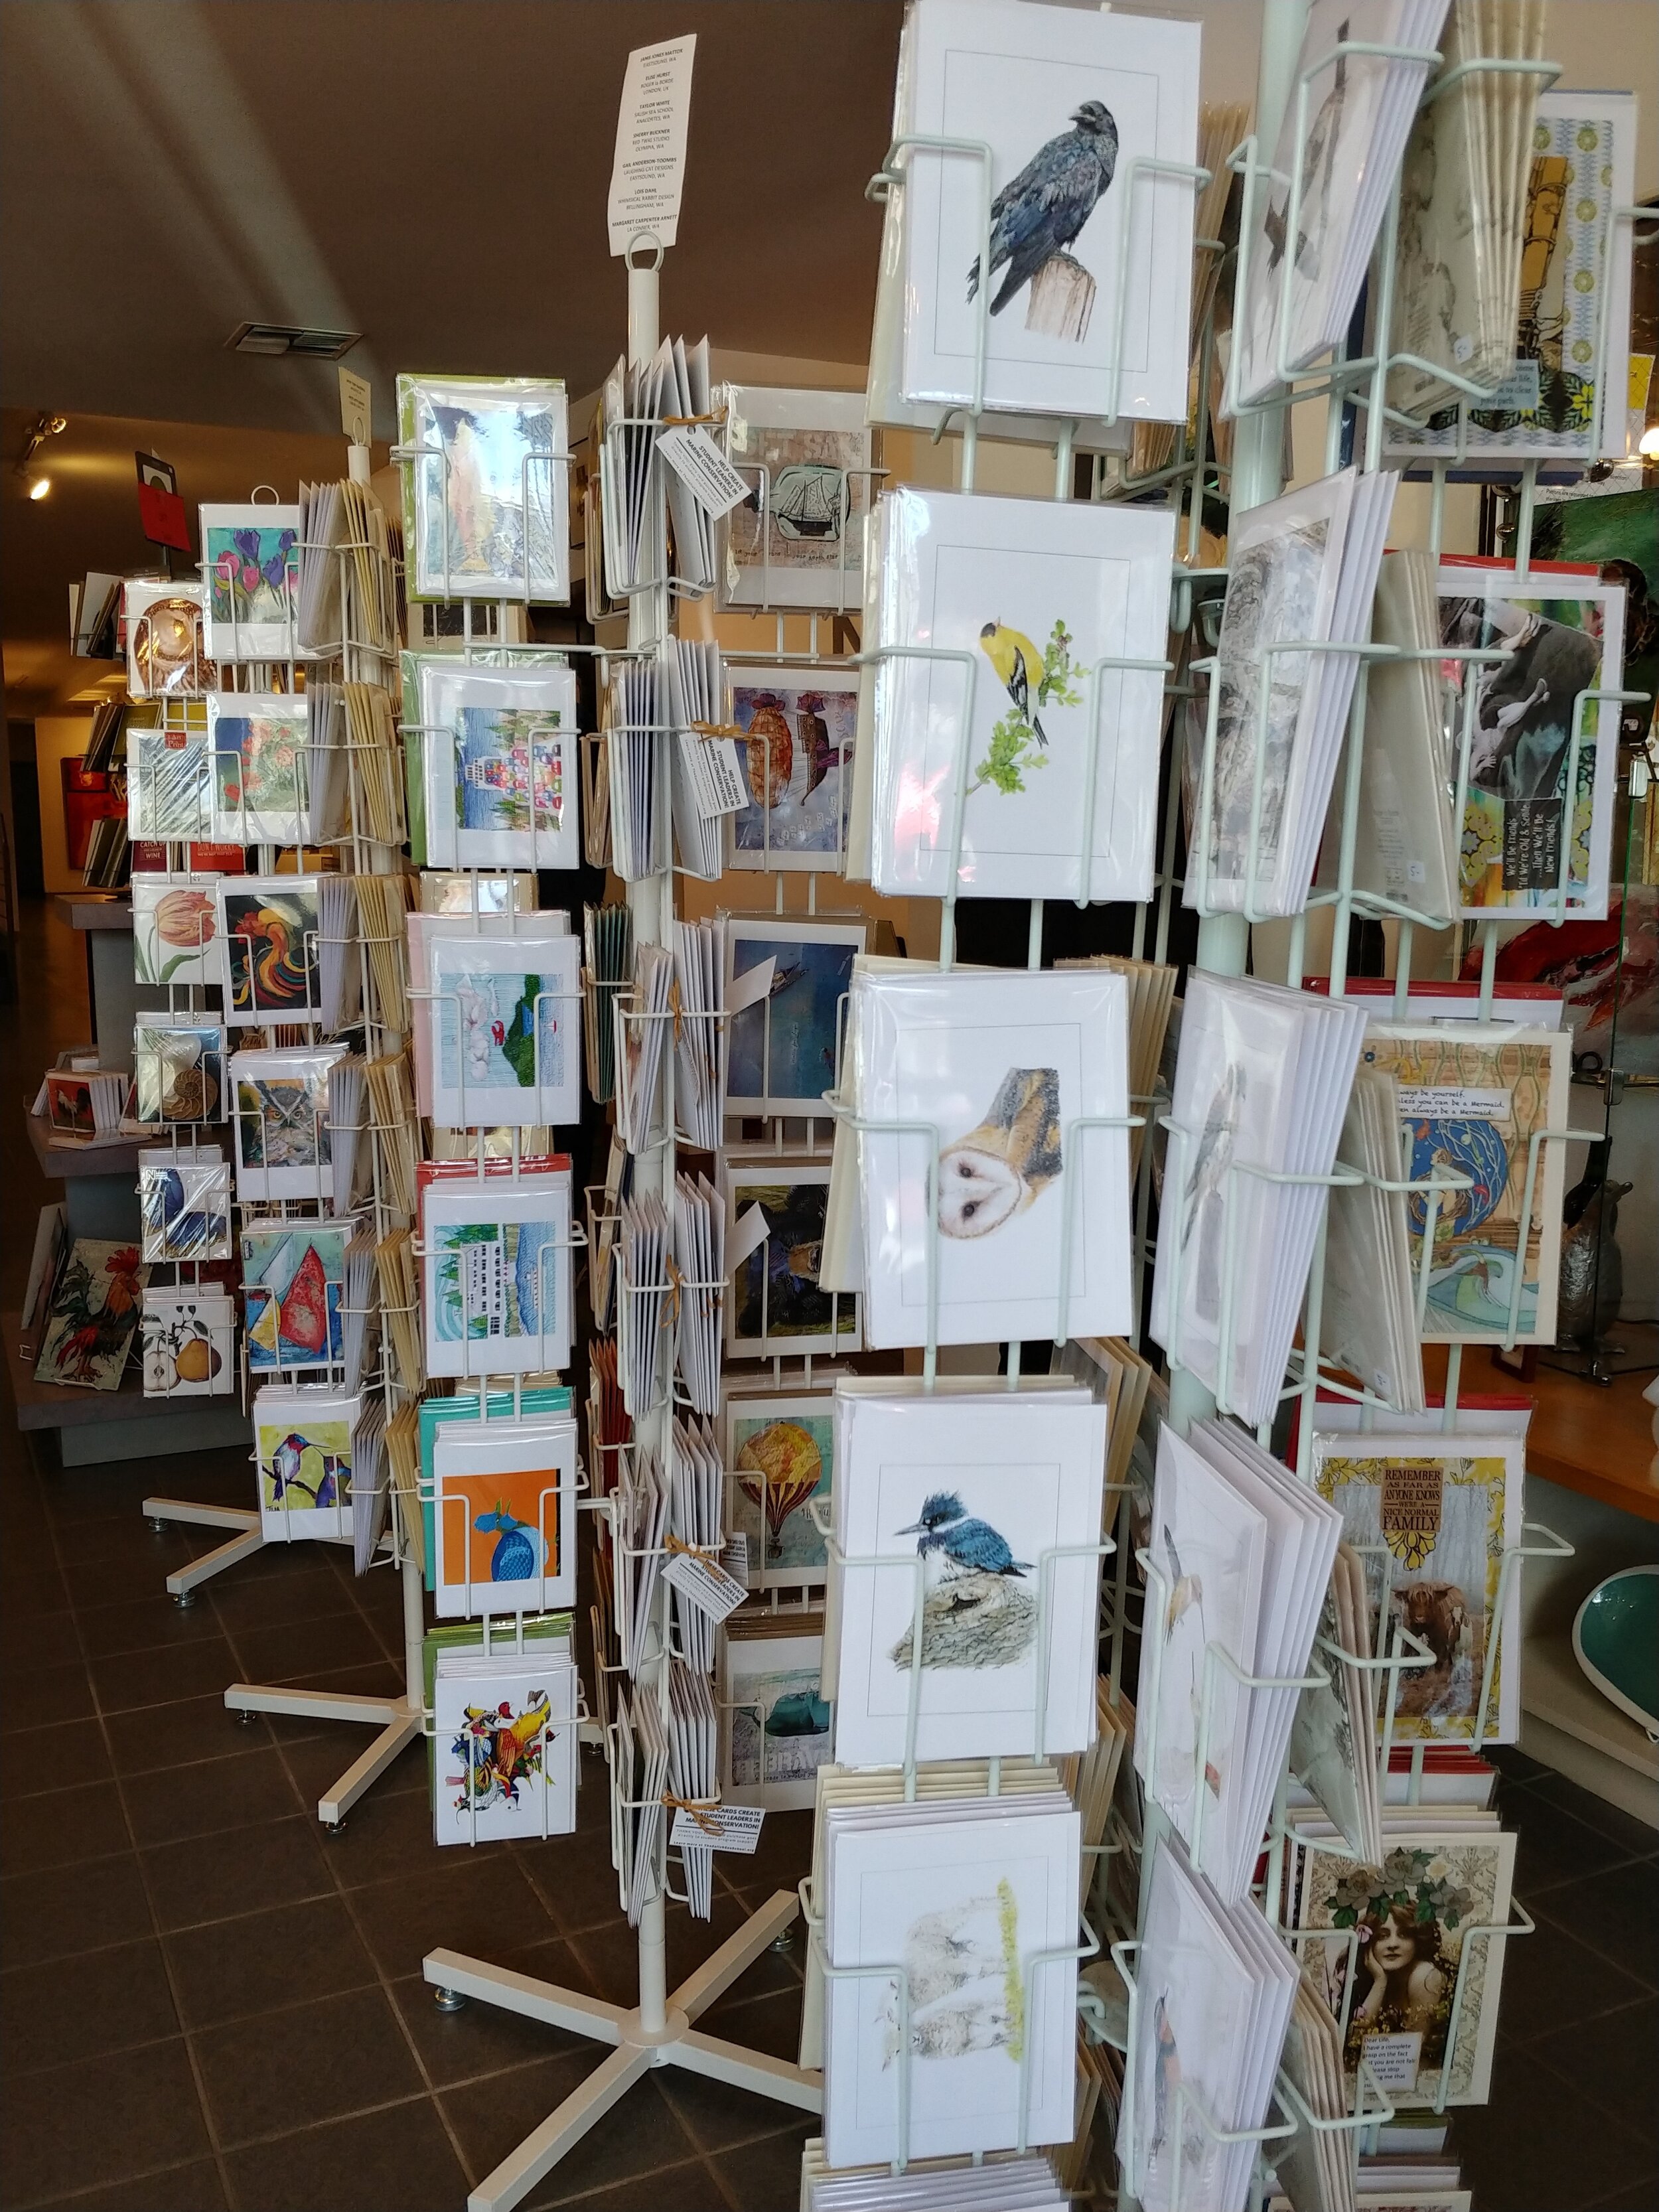 19 Local Card Artisans in the MoNA Store